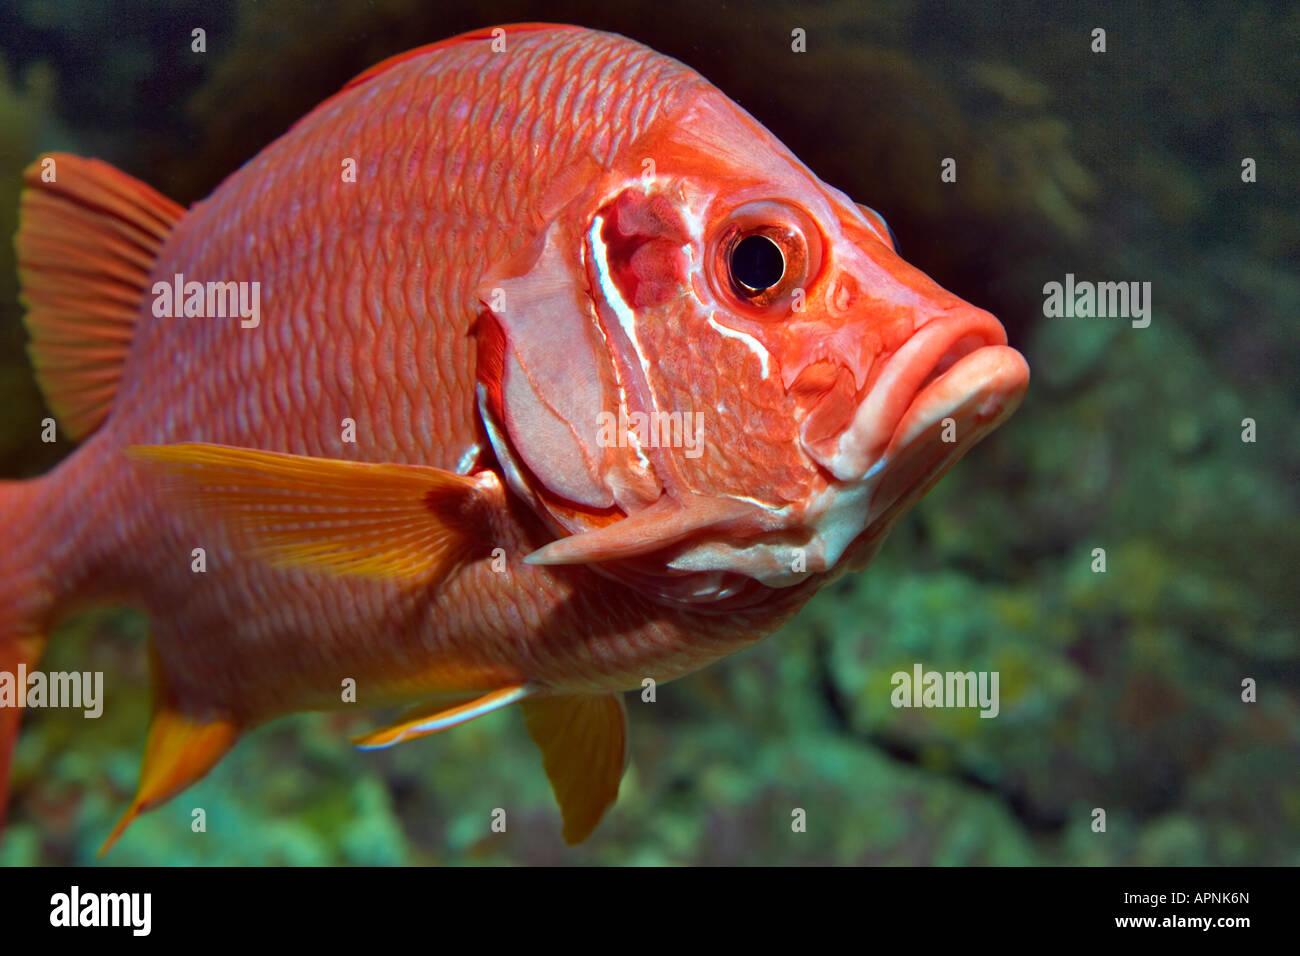 In The Red Sea near the Marsa Alam coast, this Giant, Long-Jaw or Sabre Squirrelfish portrait belies his poisonous nature. Stock Photo